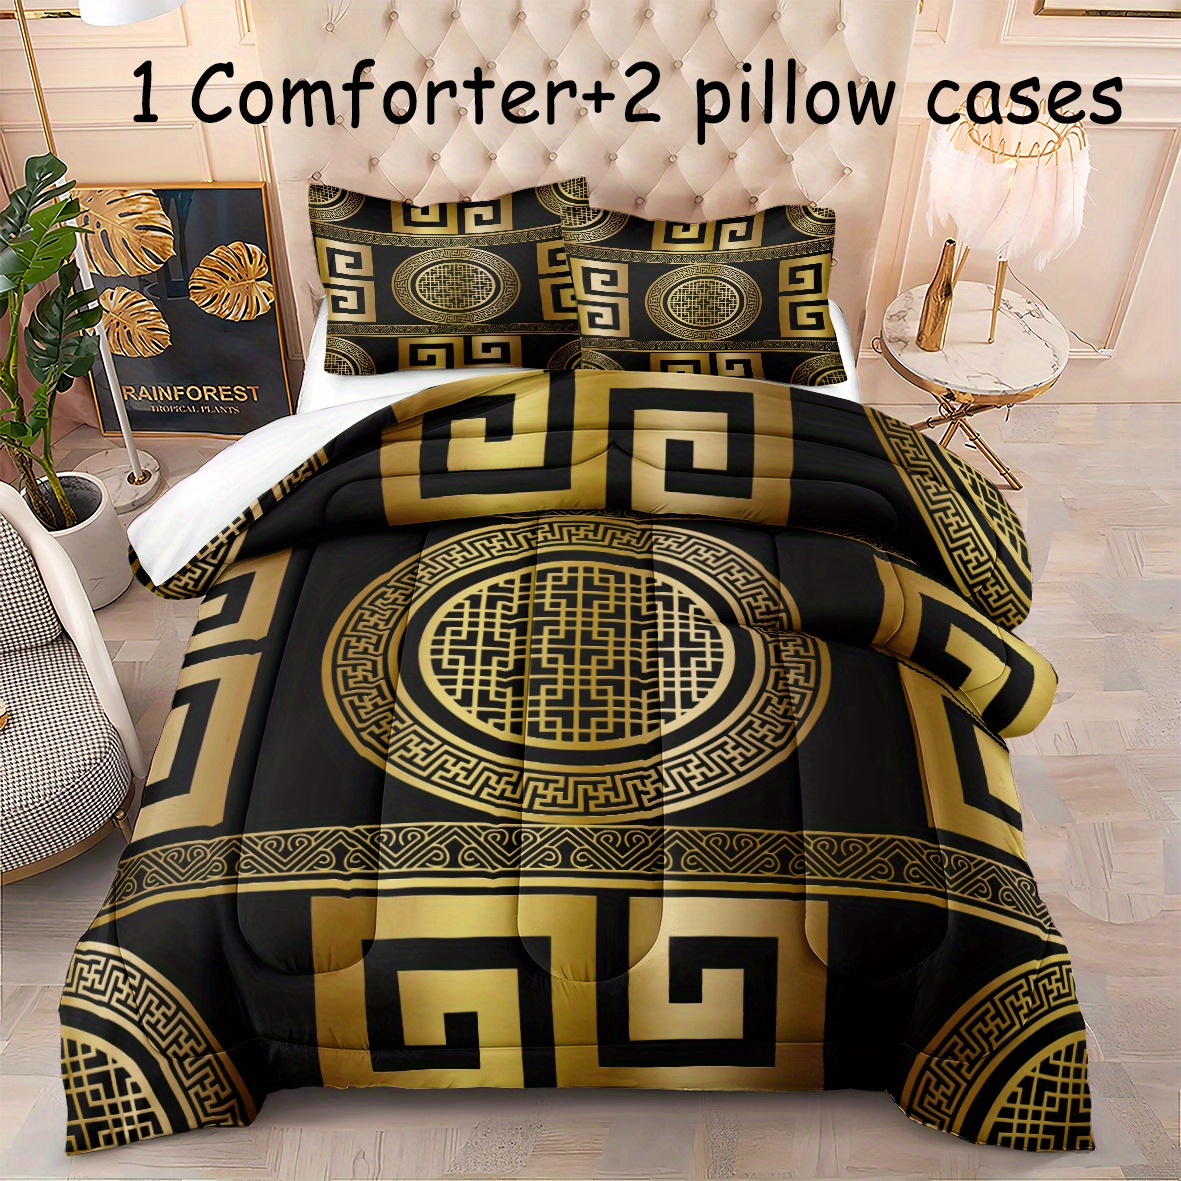 

3pcs Luxury Golden Geometric Printed Comforter Set (1 Comforter + 2 Pillowcases, Pillows Not Included), 4 Seasons Quilted Soft Comfortable Breathable Printed Bedding For Bedroom Home Dorm Decor